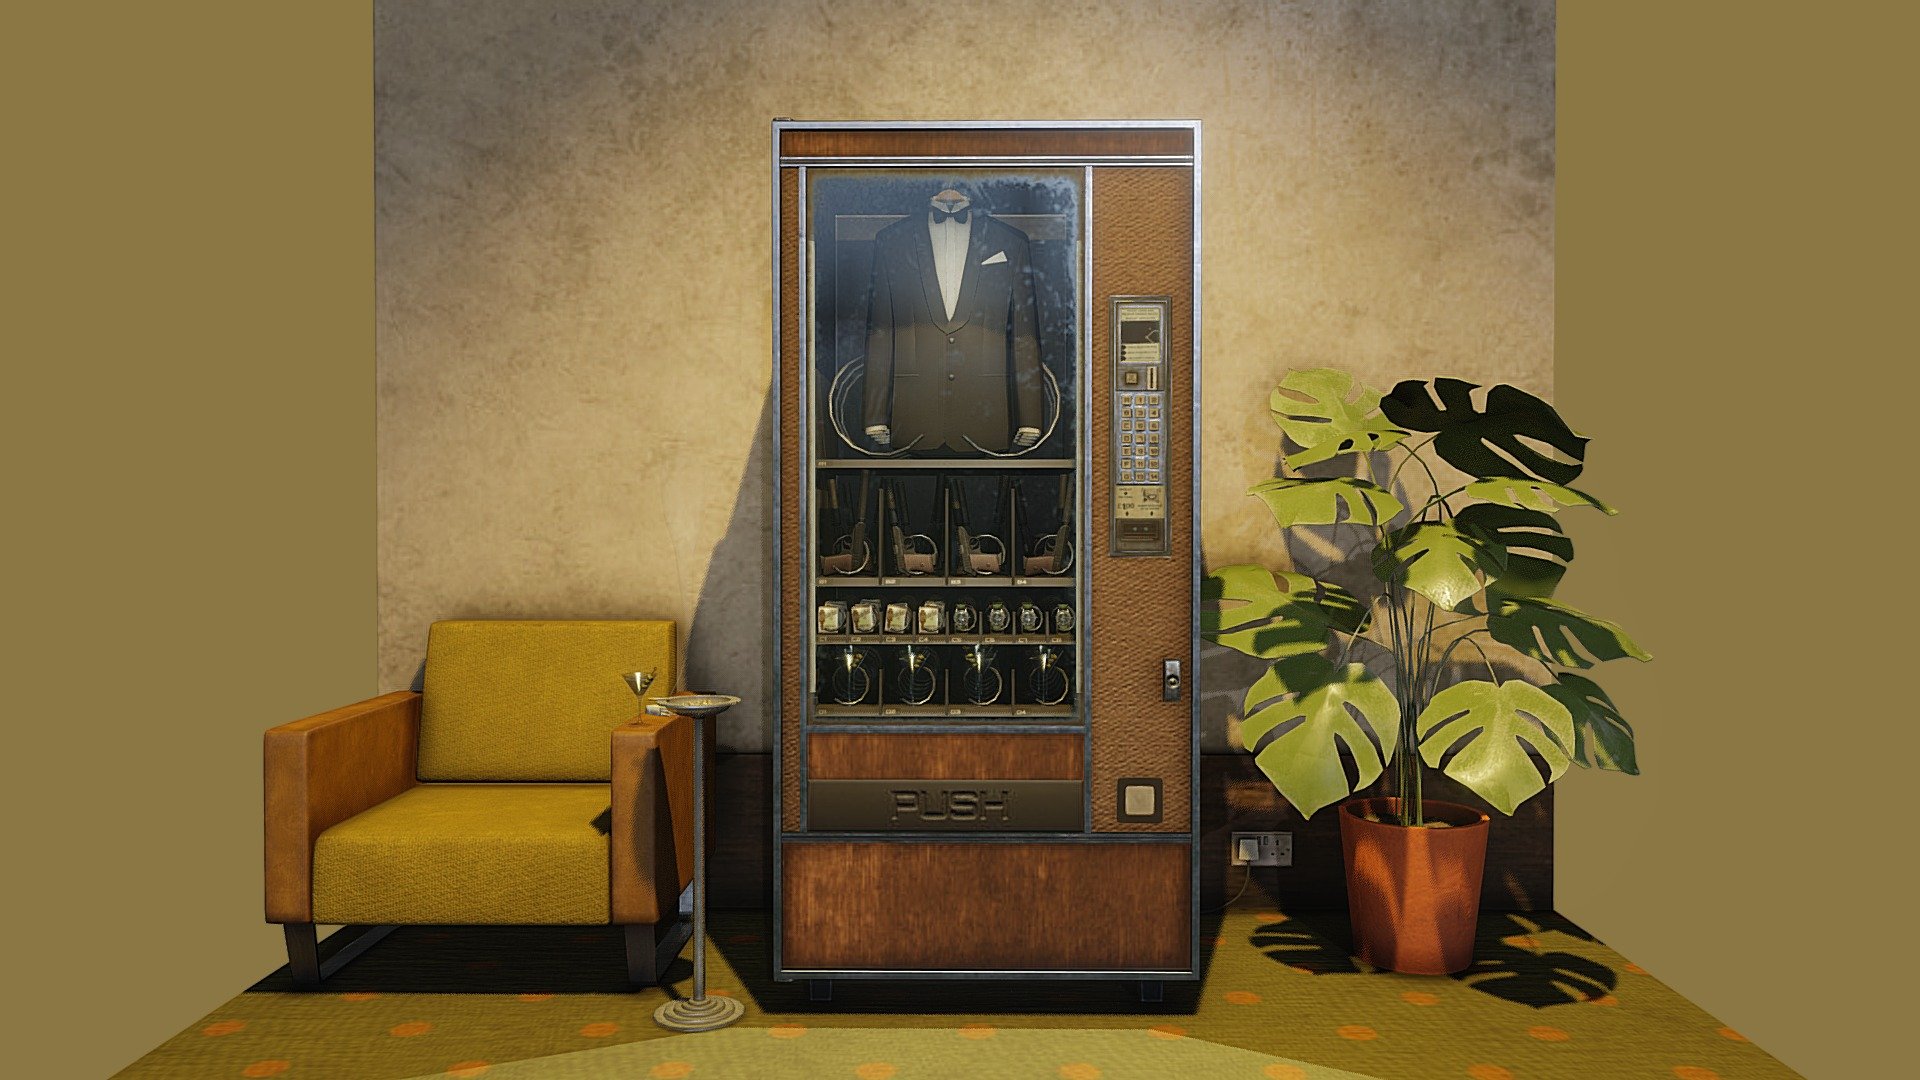 The Inconspicuous Secret Agent Party Essentials Vending Machine, great for when you have escaped capture and need to blend in to the nearest ballroom or casino. Made for #VendingMachineChallenge 

Items in the machine




Tuxedo

Walther PPK silenced

Chesterfield Cigarettes

Martini

Rolex Submariner

The chair and Ashtray are from Wes Anderson's Grand Budapest Hotel 60's lobby scene.

Modelled in Blender, textured in substance 3d model